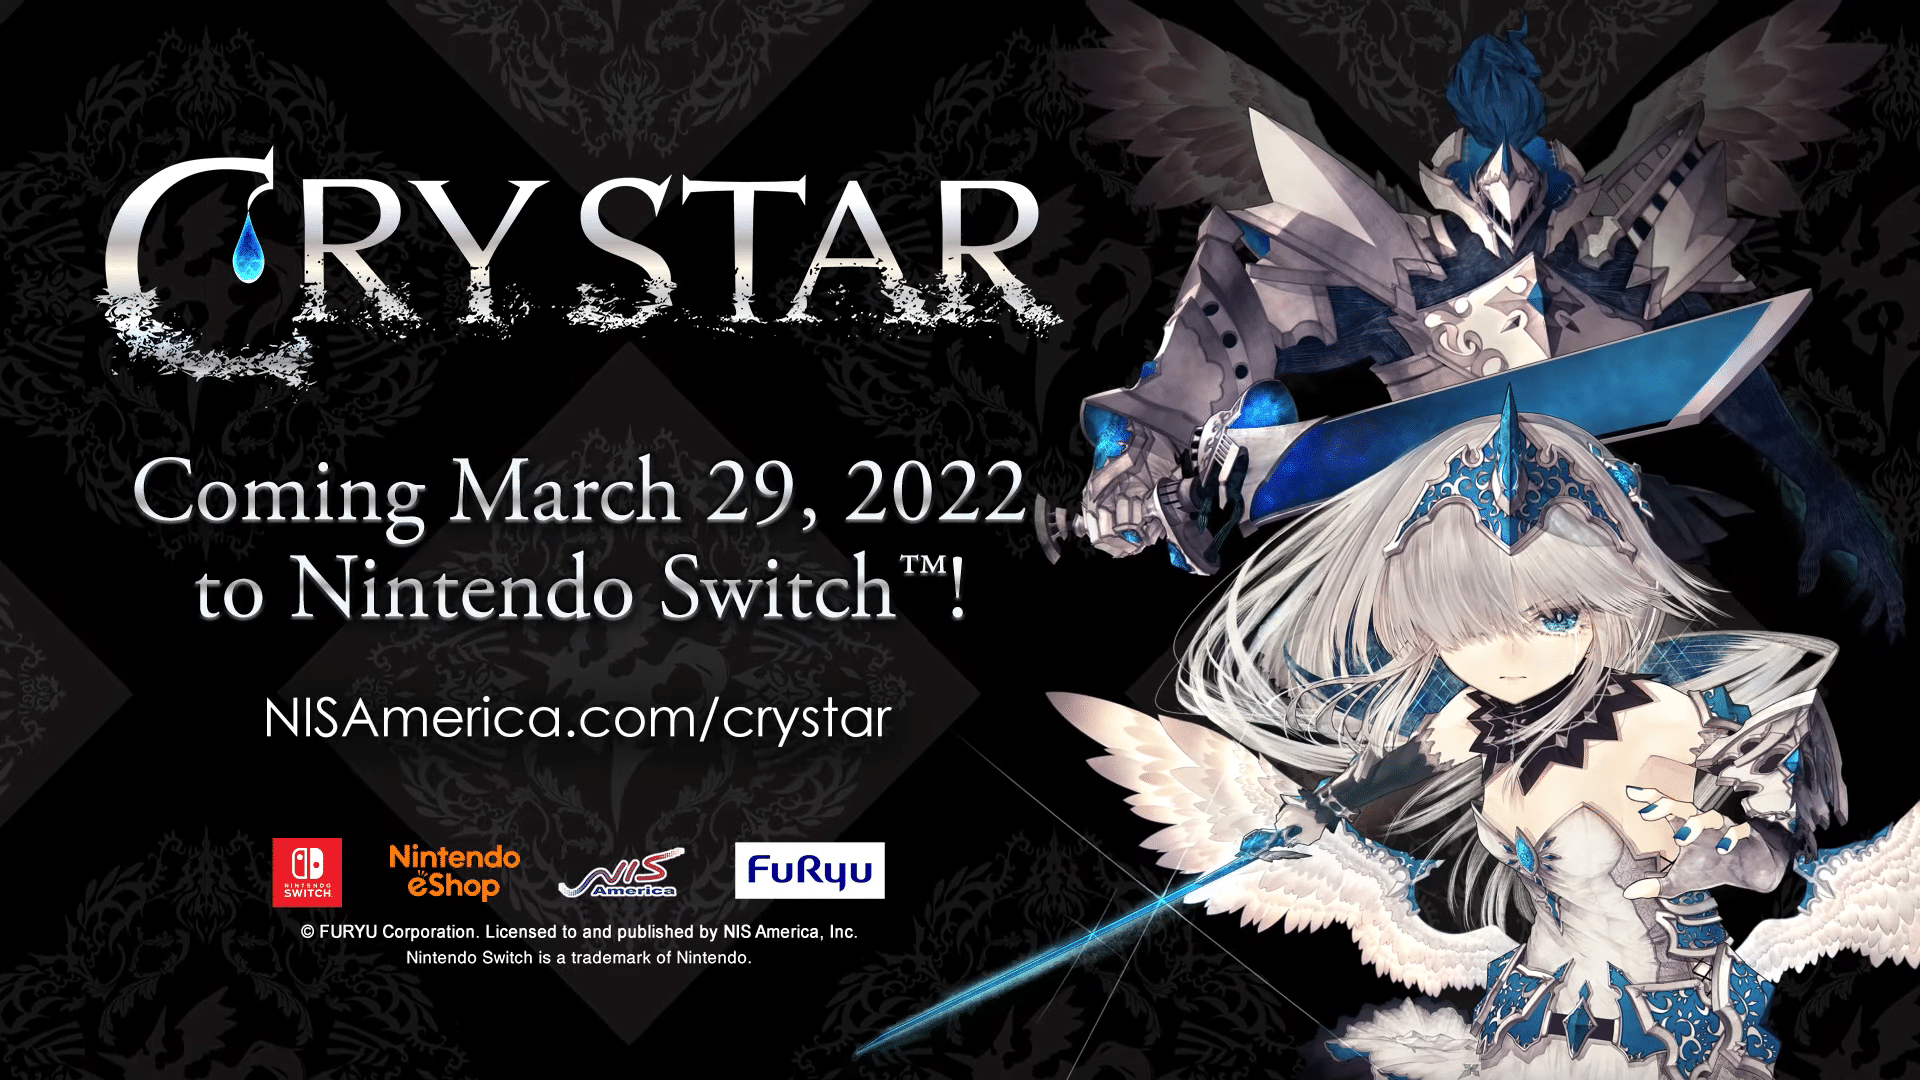 Crystar launches March/April 2022